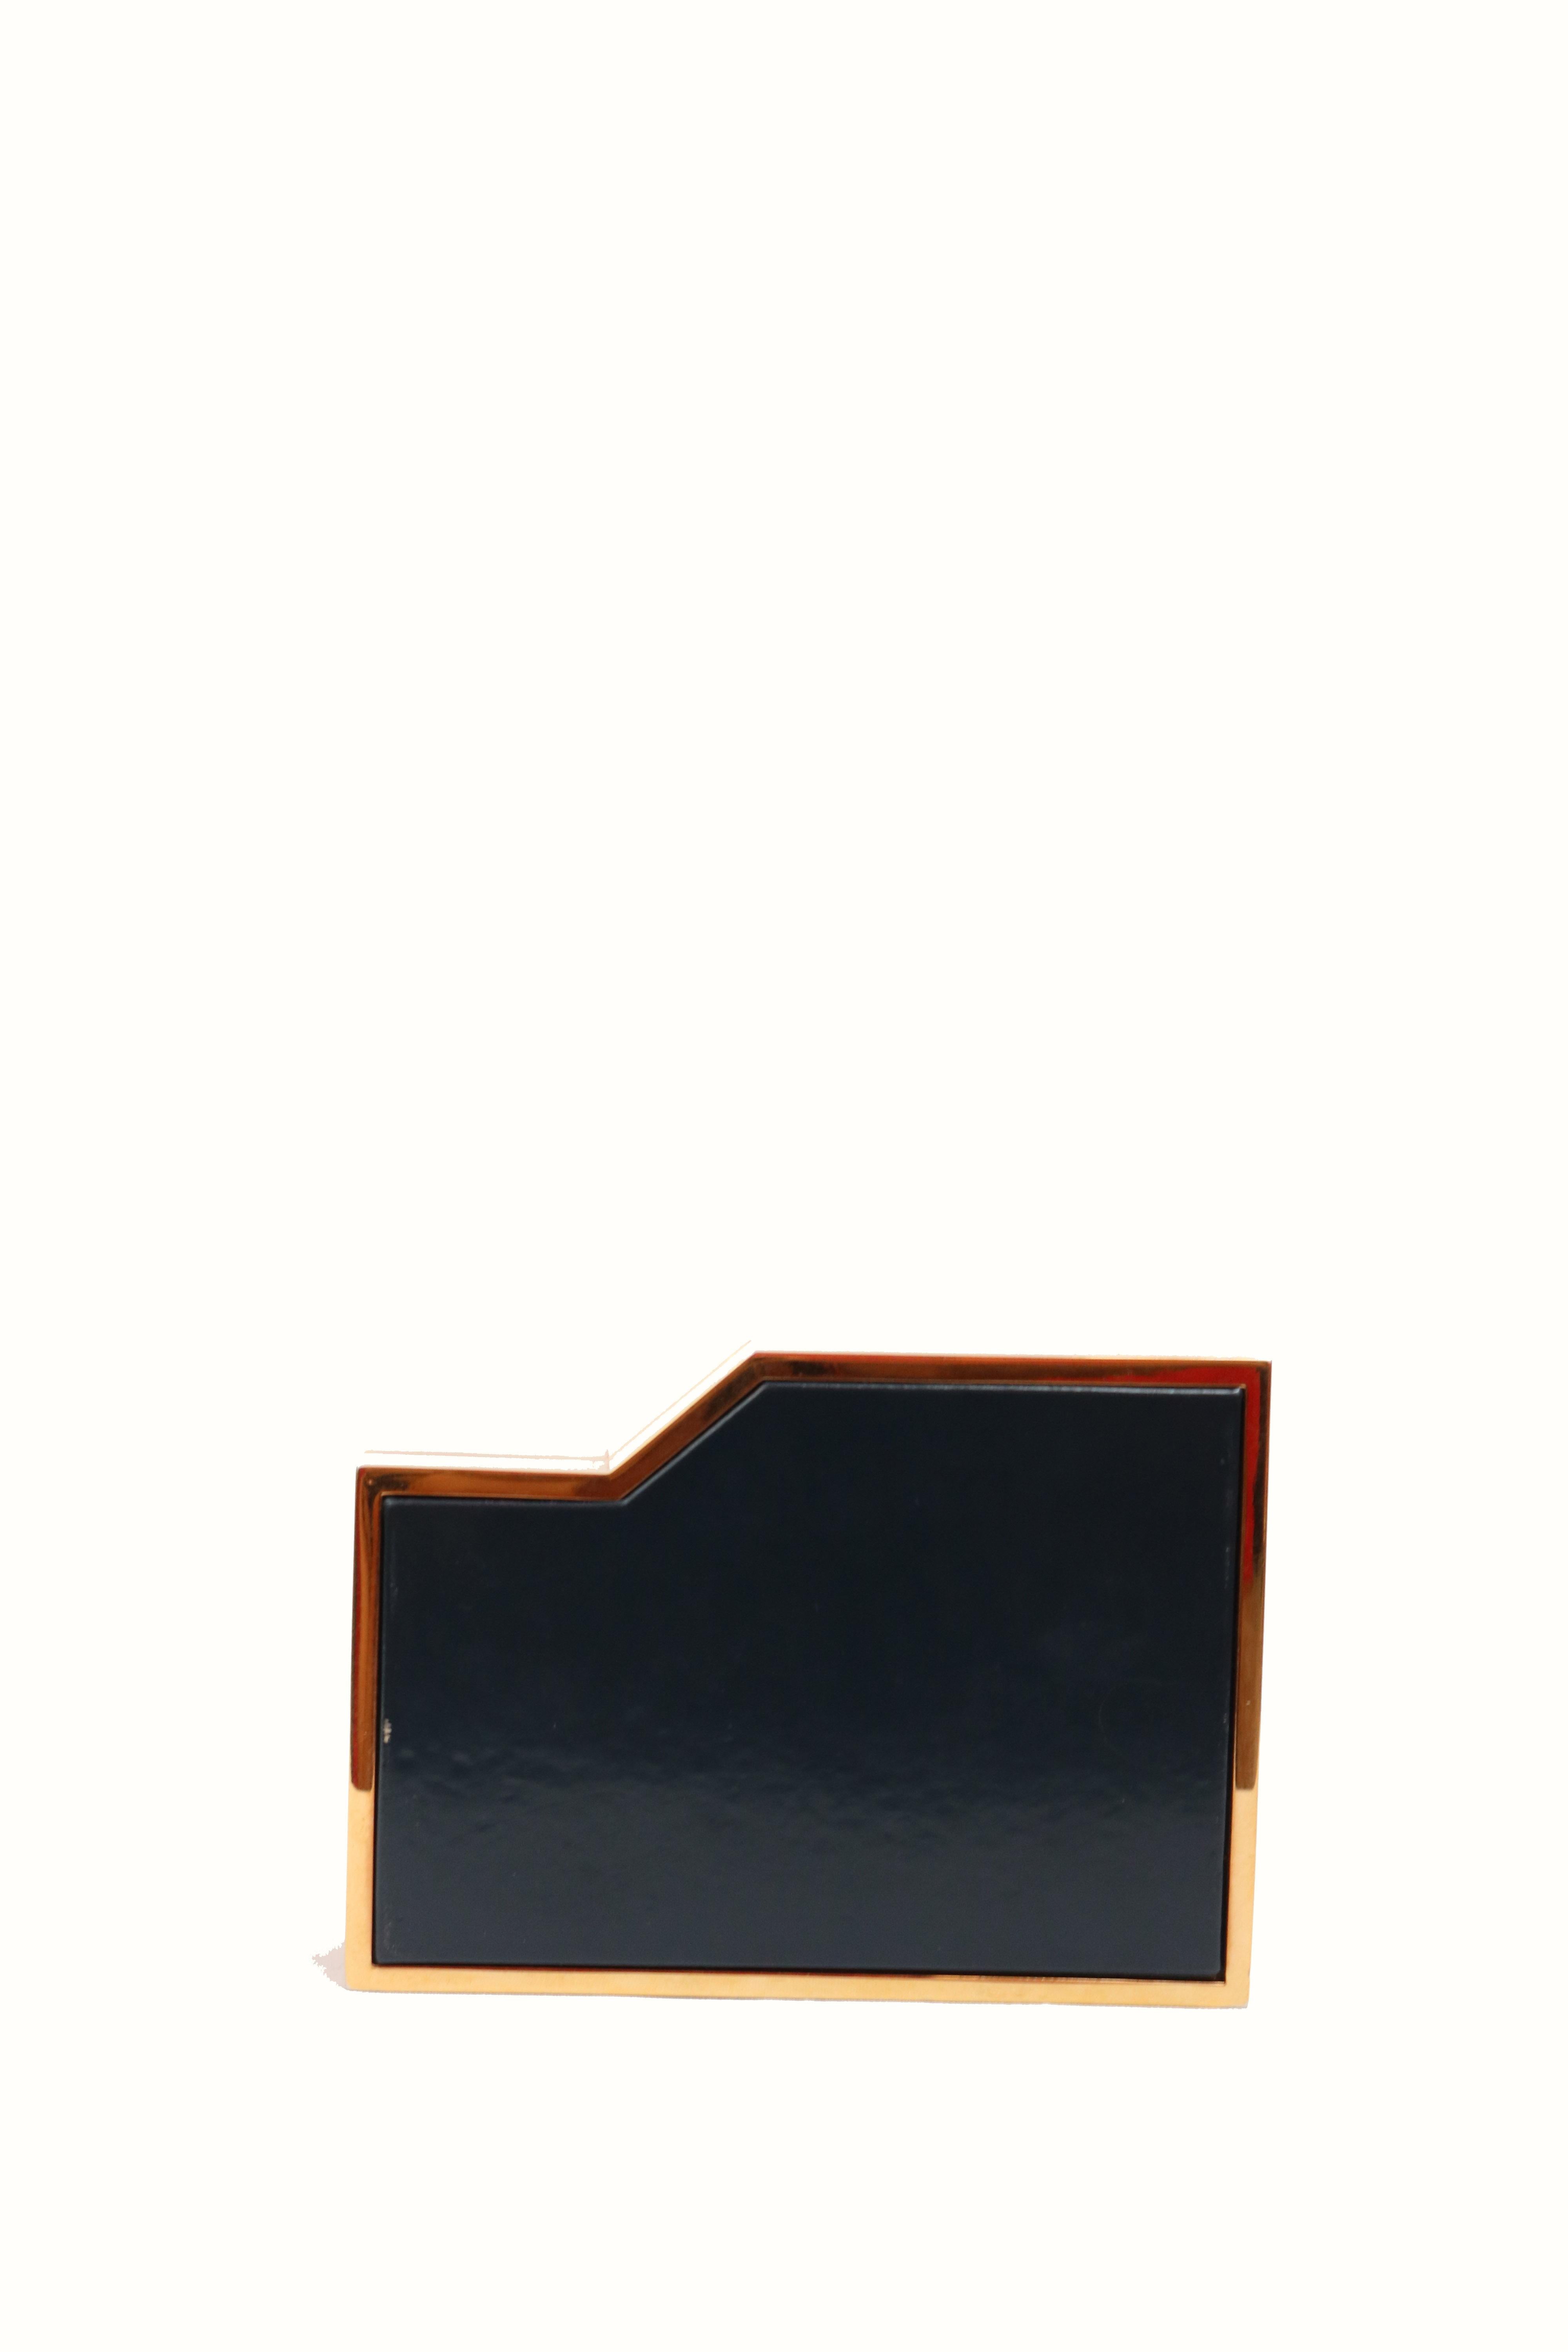 -Geometric gold, pink and navy clutch 
-Front face is pink in ponyhair leather 
-Back is navy leather 
-Gold-tone hardware
-Light gray inside leather 
-Signs of worn, please see photos. 
